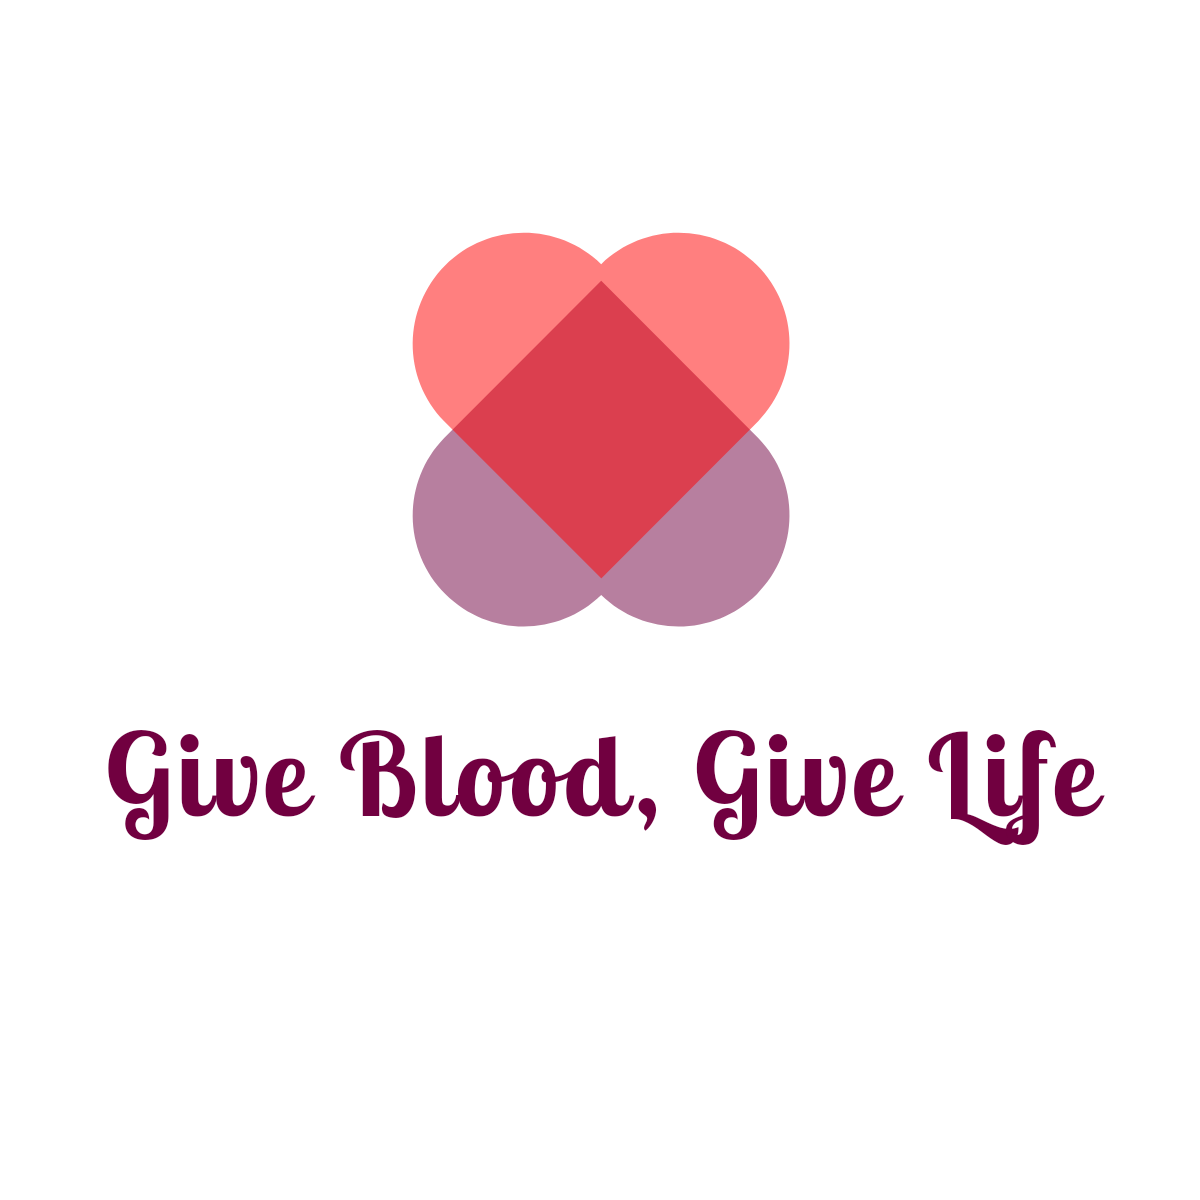 Give Blood, Give Life